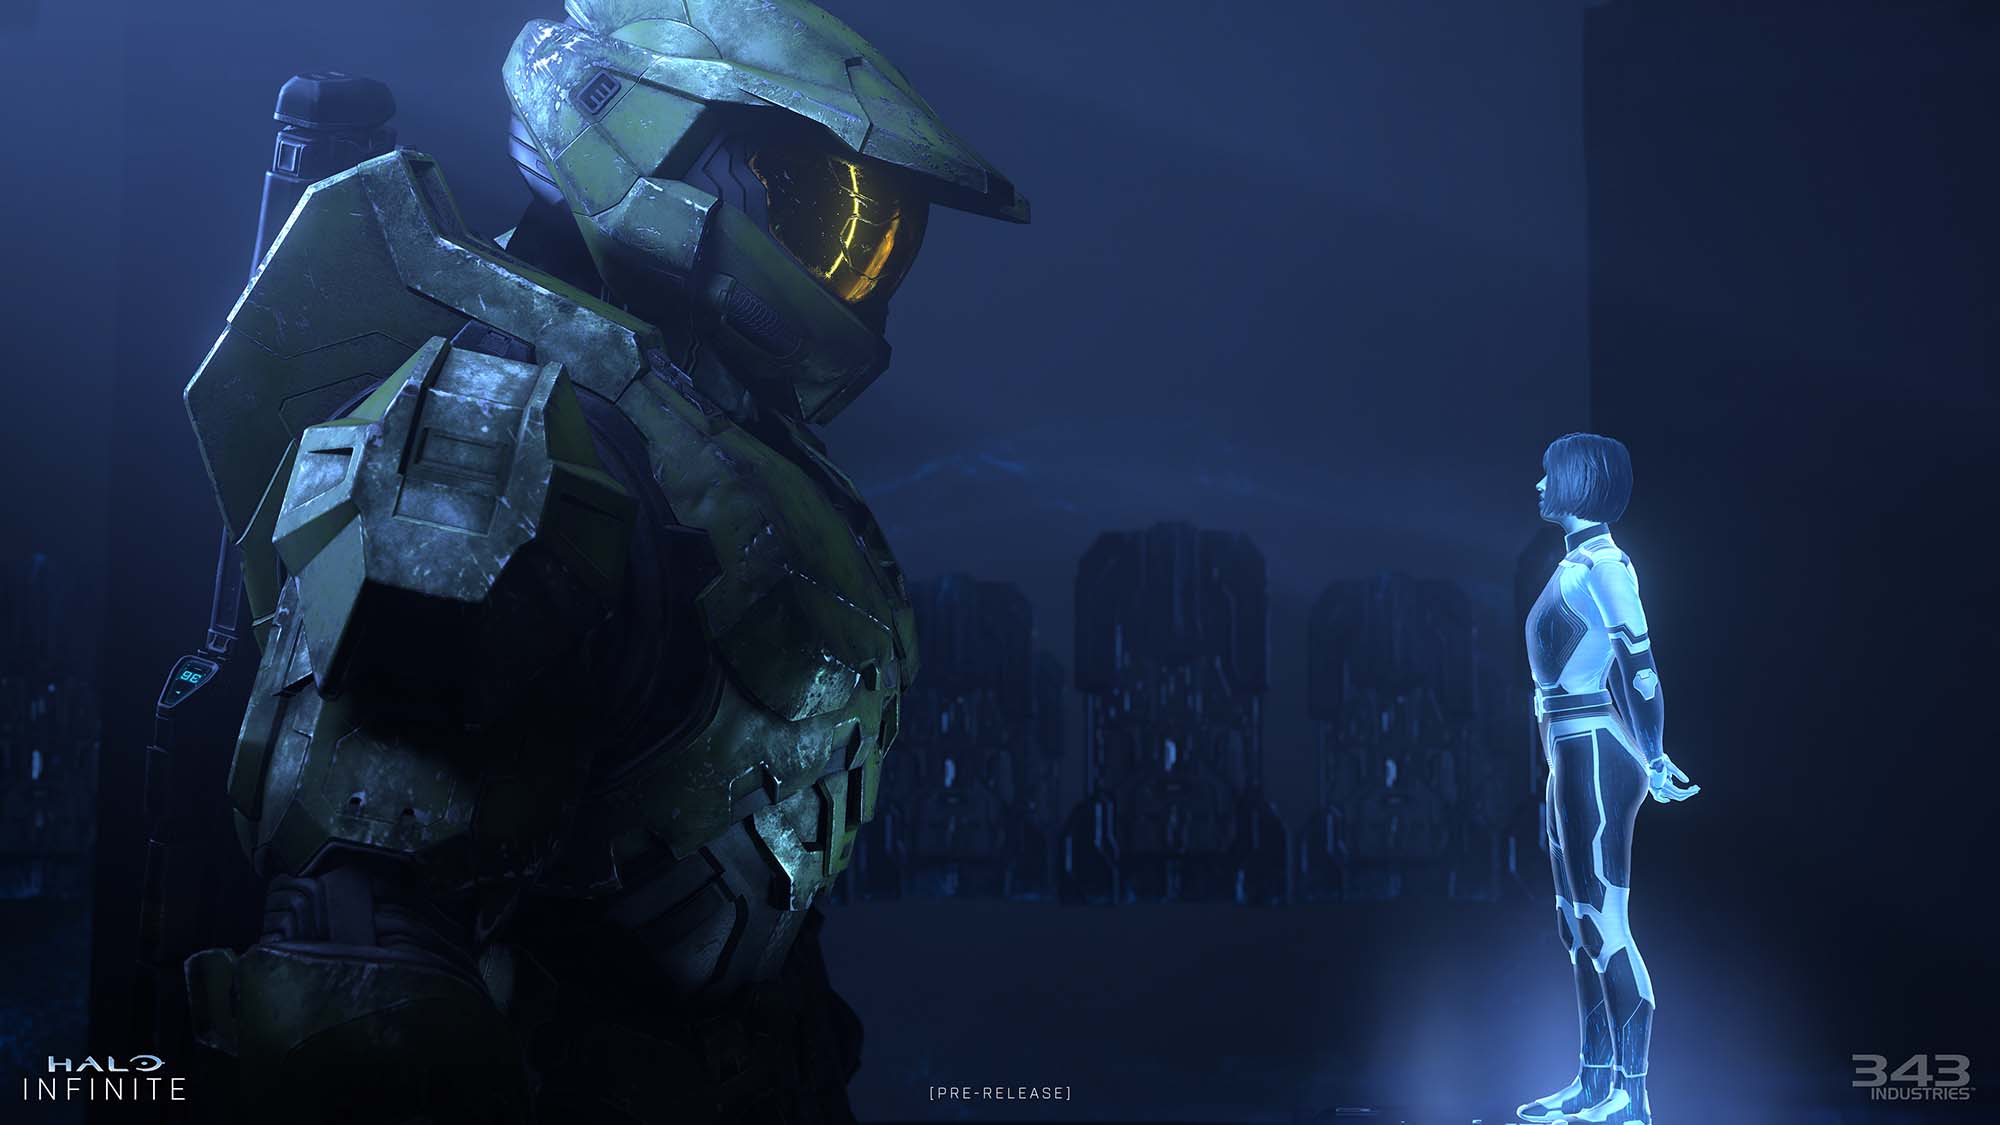 Halo Infinite Chief with Weapon